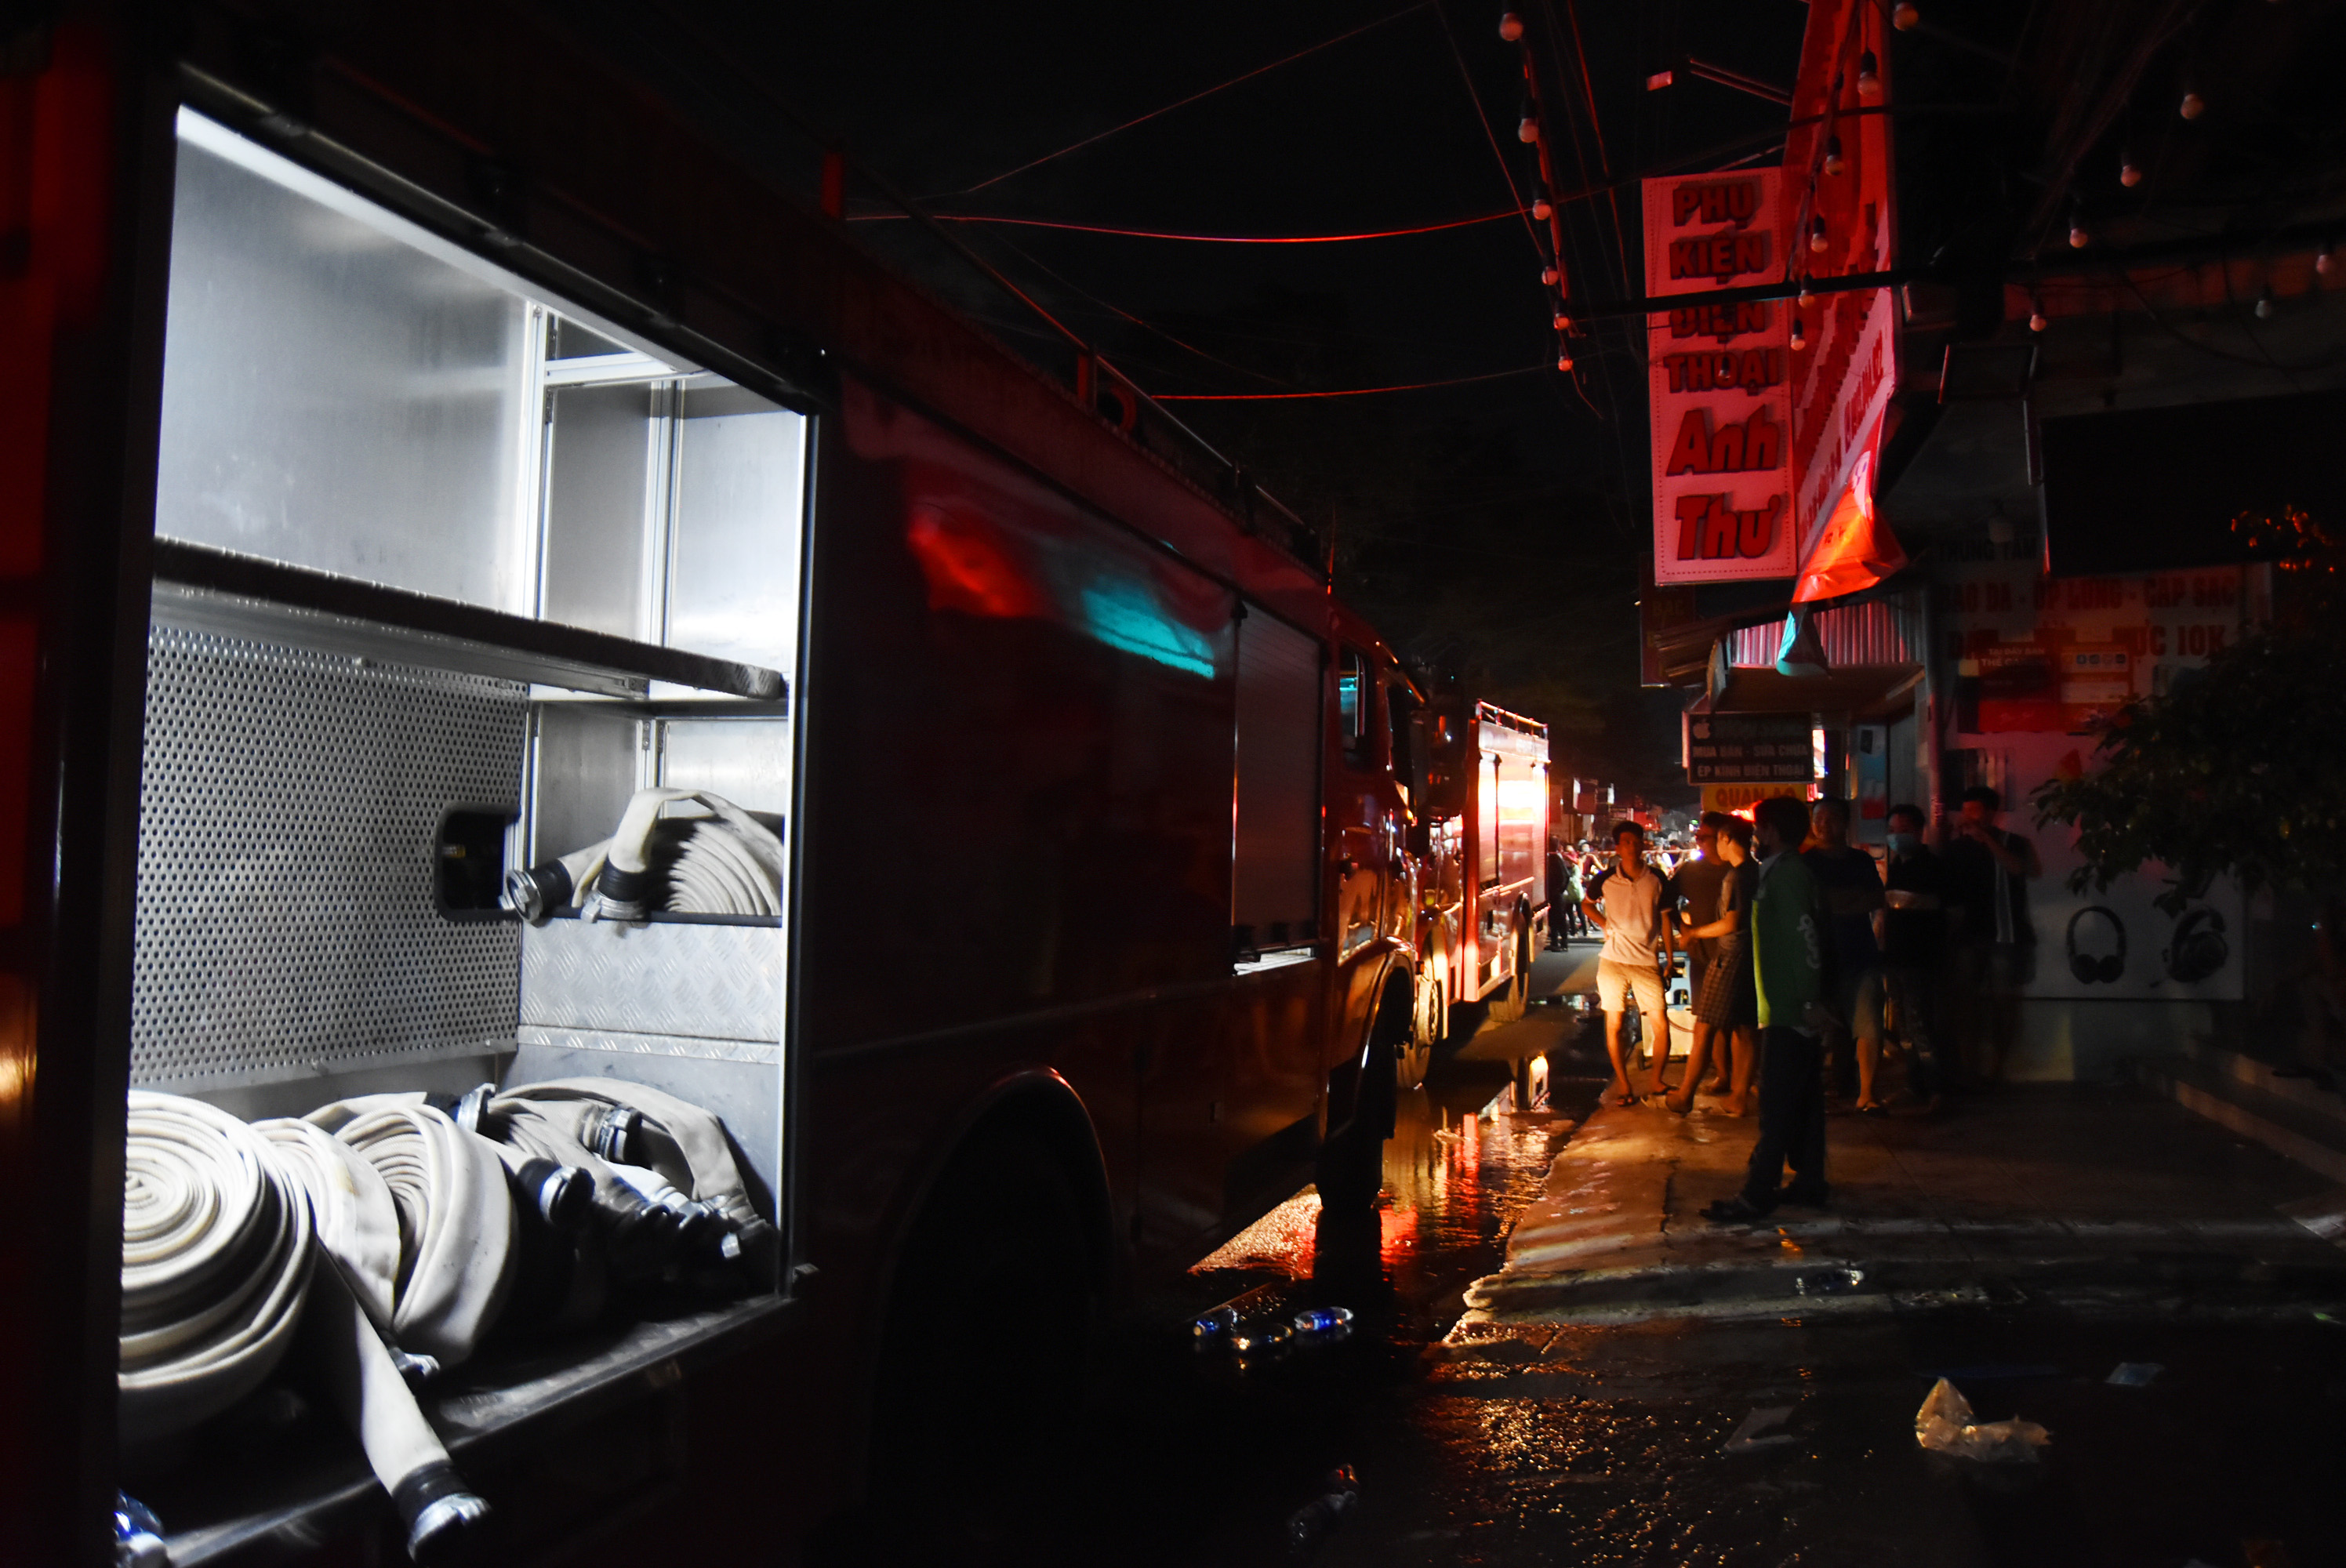 Fire engines in front of Yen Nhi karaoke parlor in Dong Nai Province, Vietnam, September 11, 2022. Photo: A Loc / Tuoi Tre